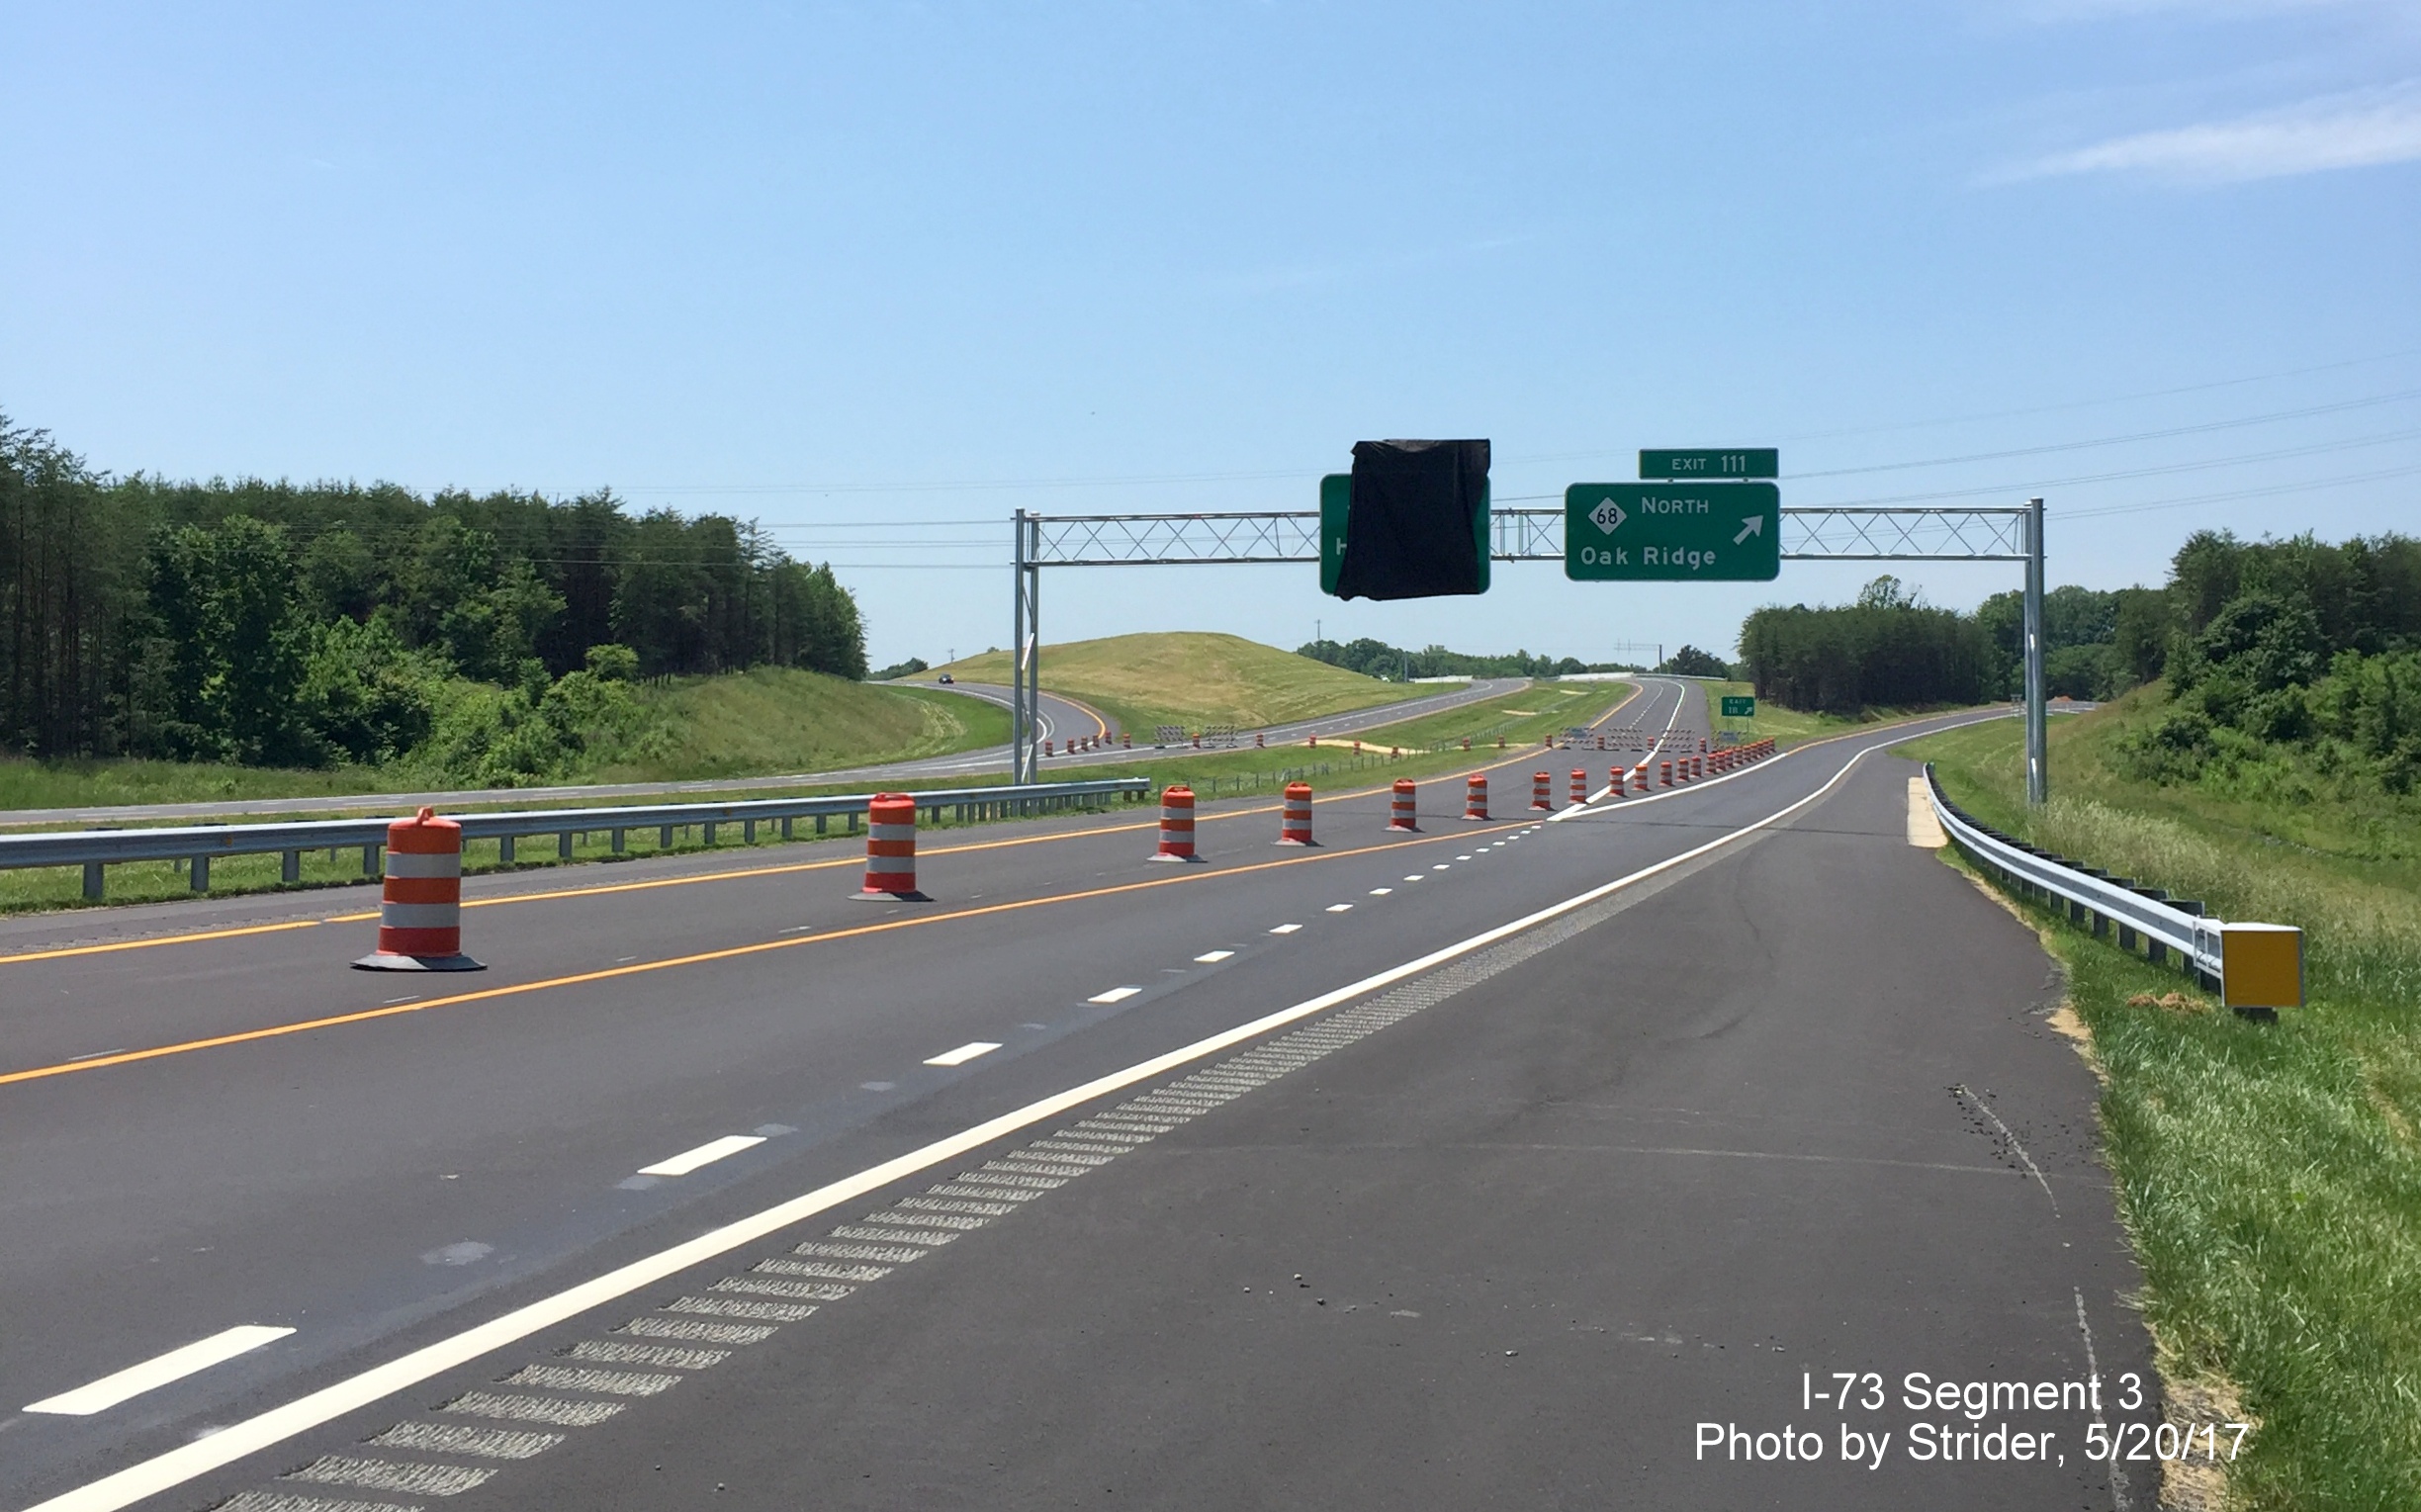 Image taken of overhead signage for NC 68 exit on newly opened I-73 South highway north of Greensboro, by Strider